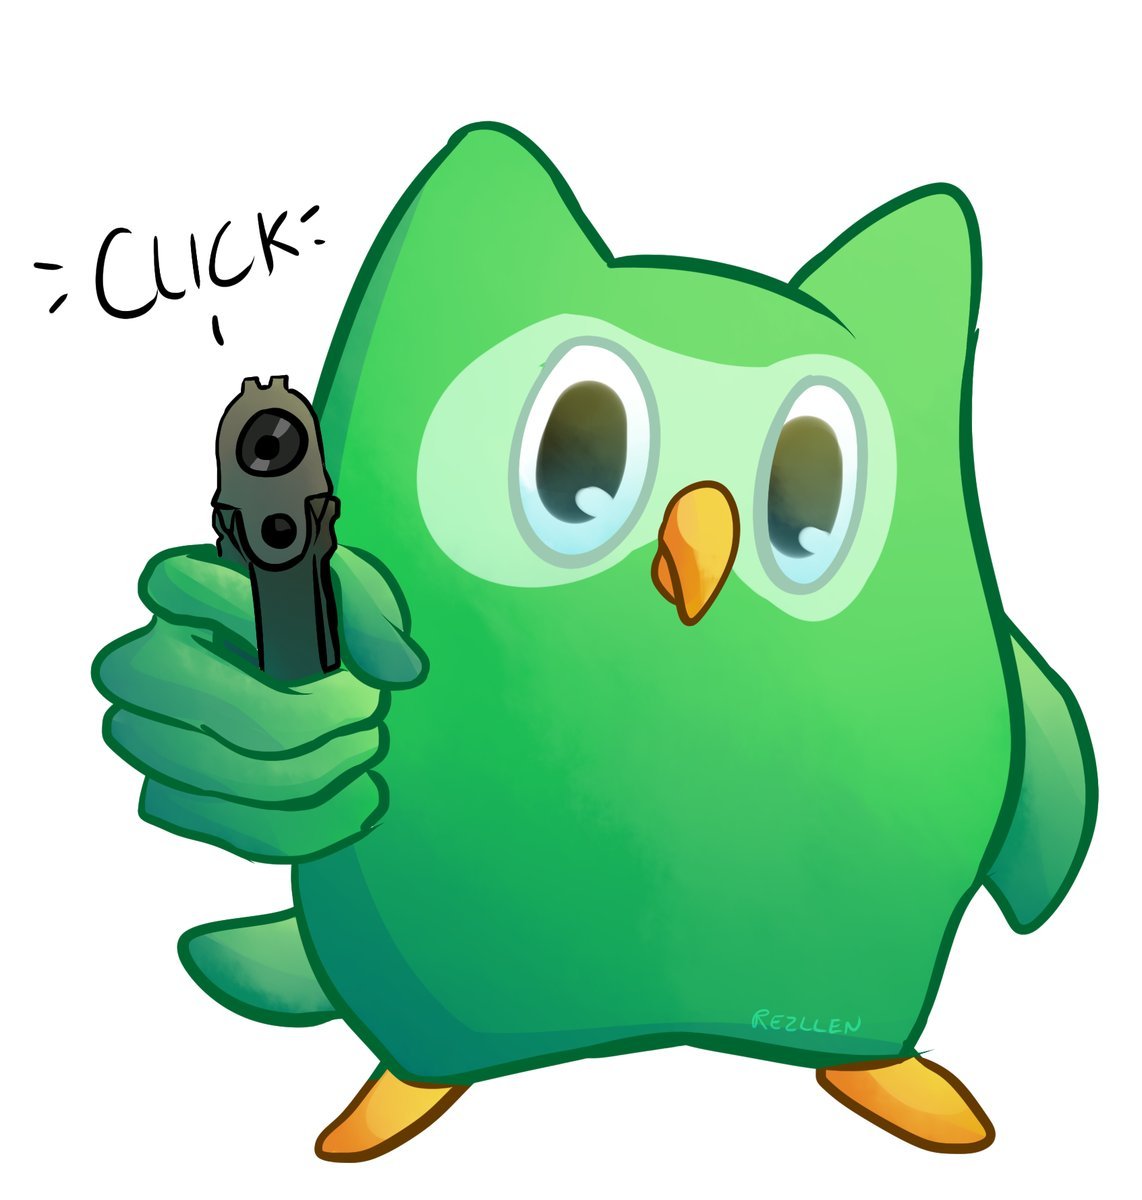 A whole bundle of arting!, You have been visited by the duolingo owl